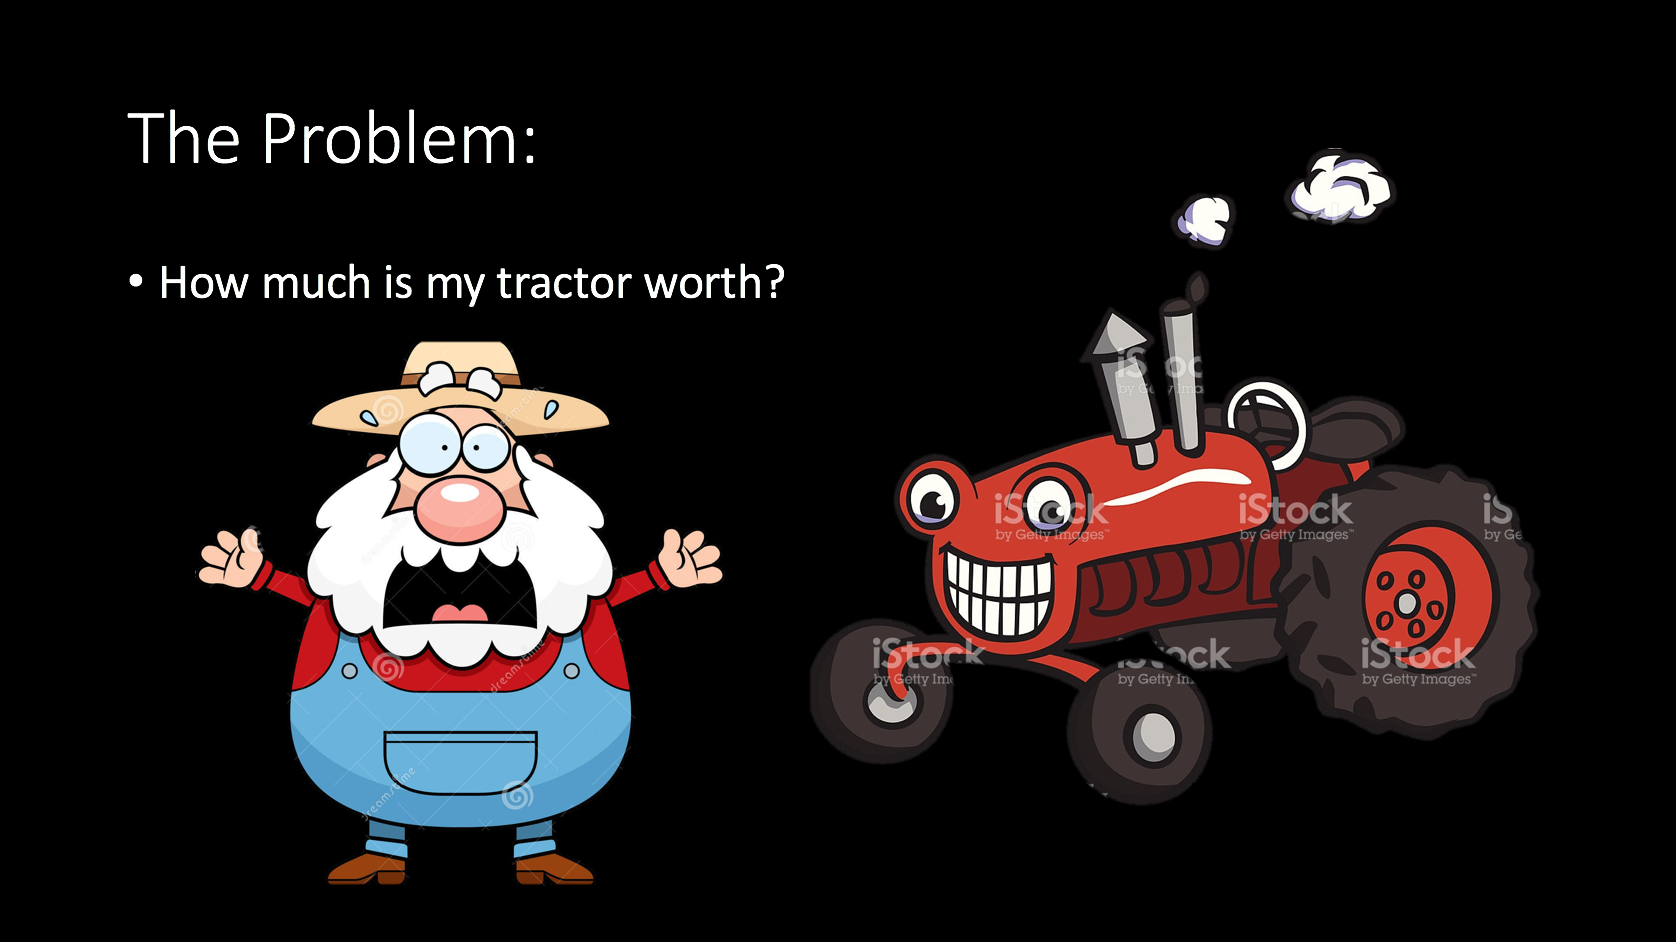 how much is my tractor worth?